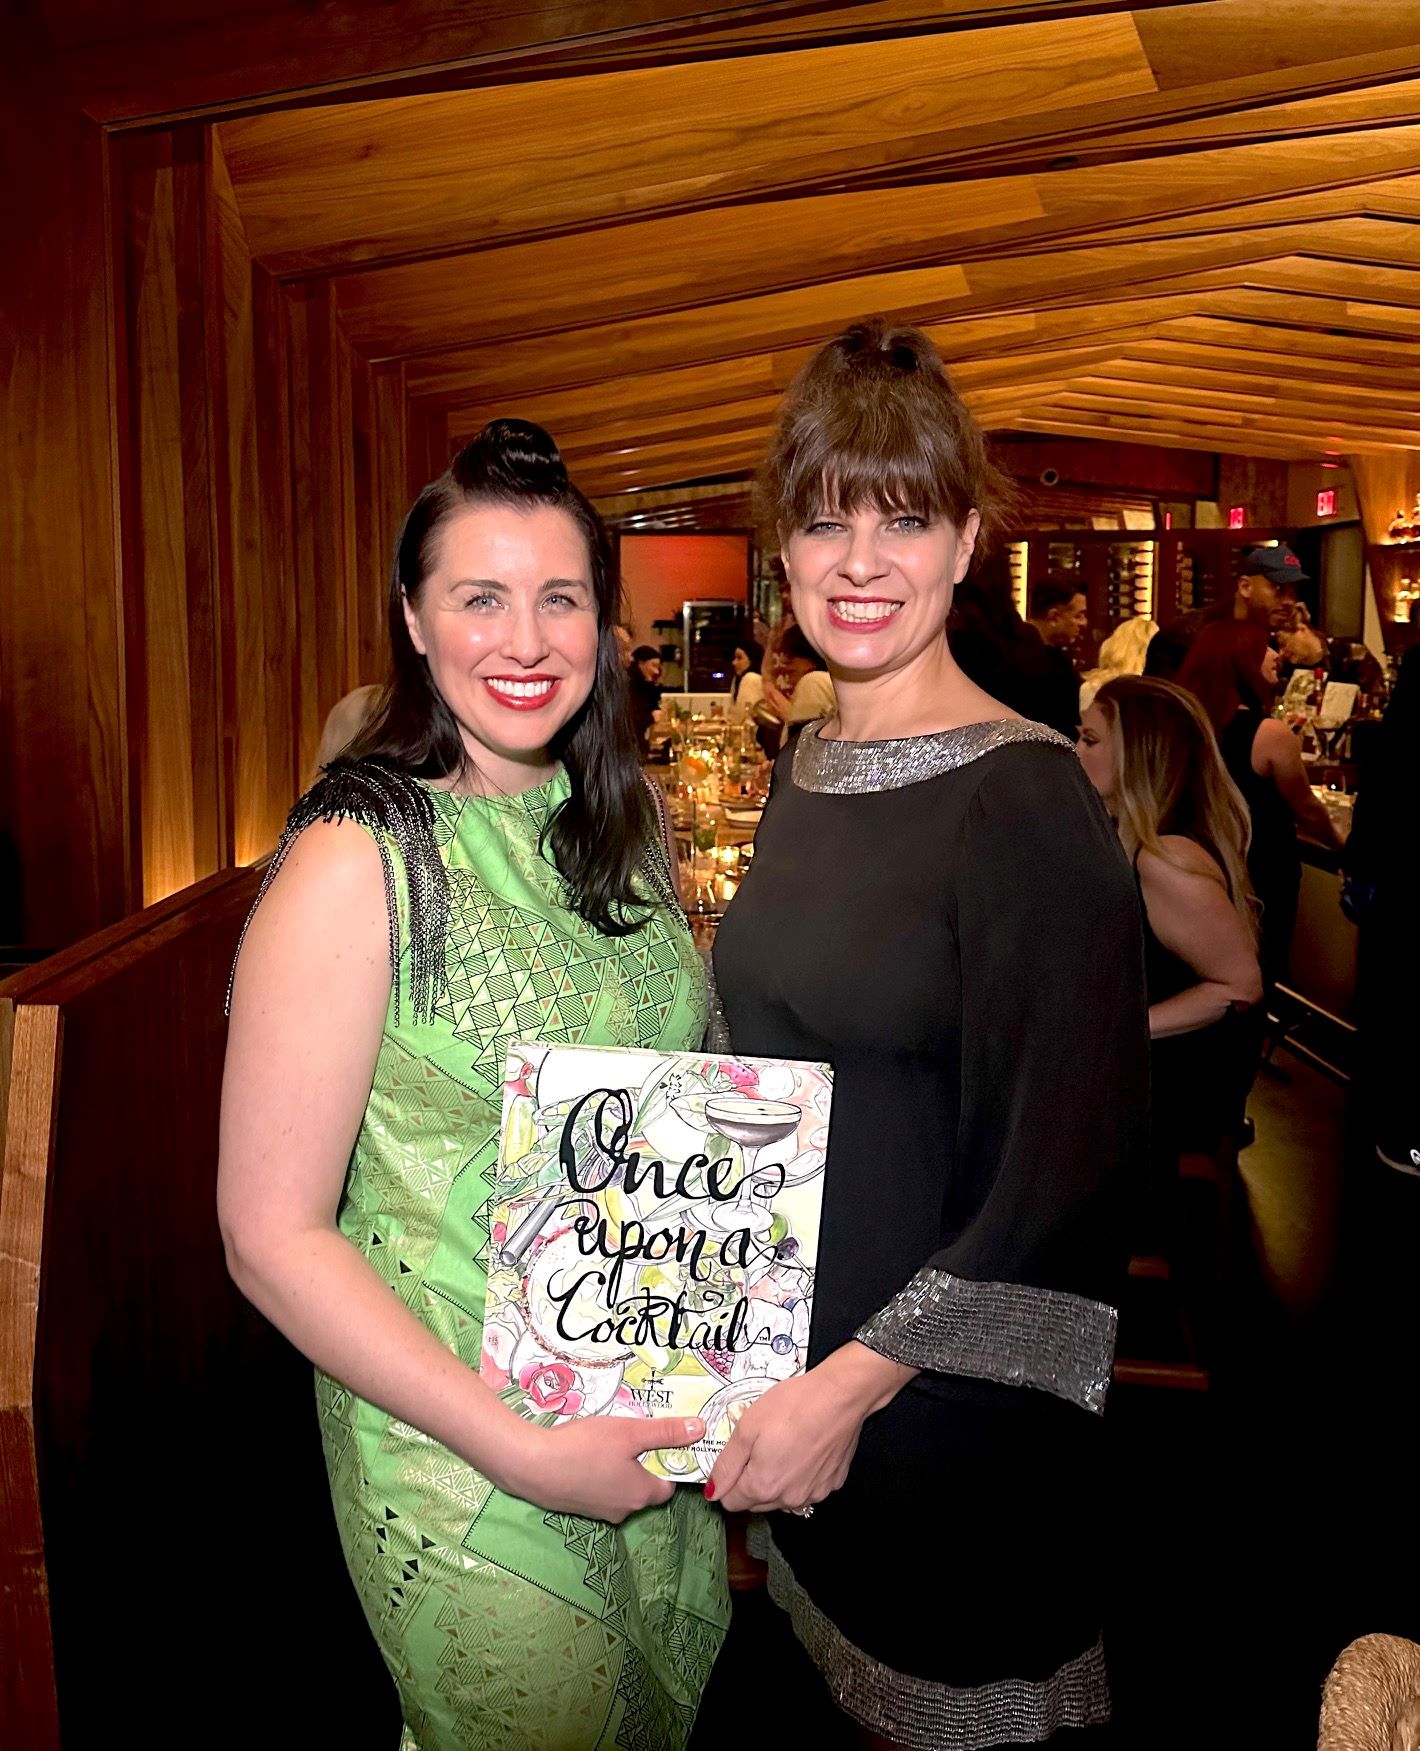 An image of Once Upon a Cocktail's Imagineer & illustrator Kate Brightside (l) and cocktail curator Sarah L.M. Mengoni (r) posing with their cocktail recipe book at their International Women's Day celebration at Soulmate.